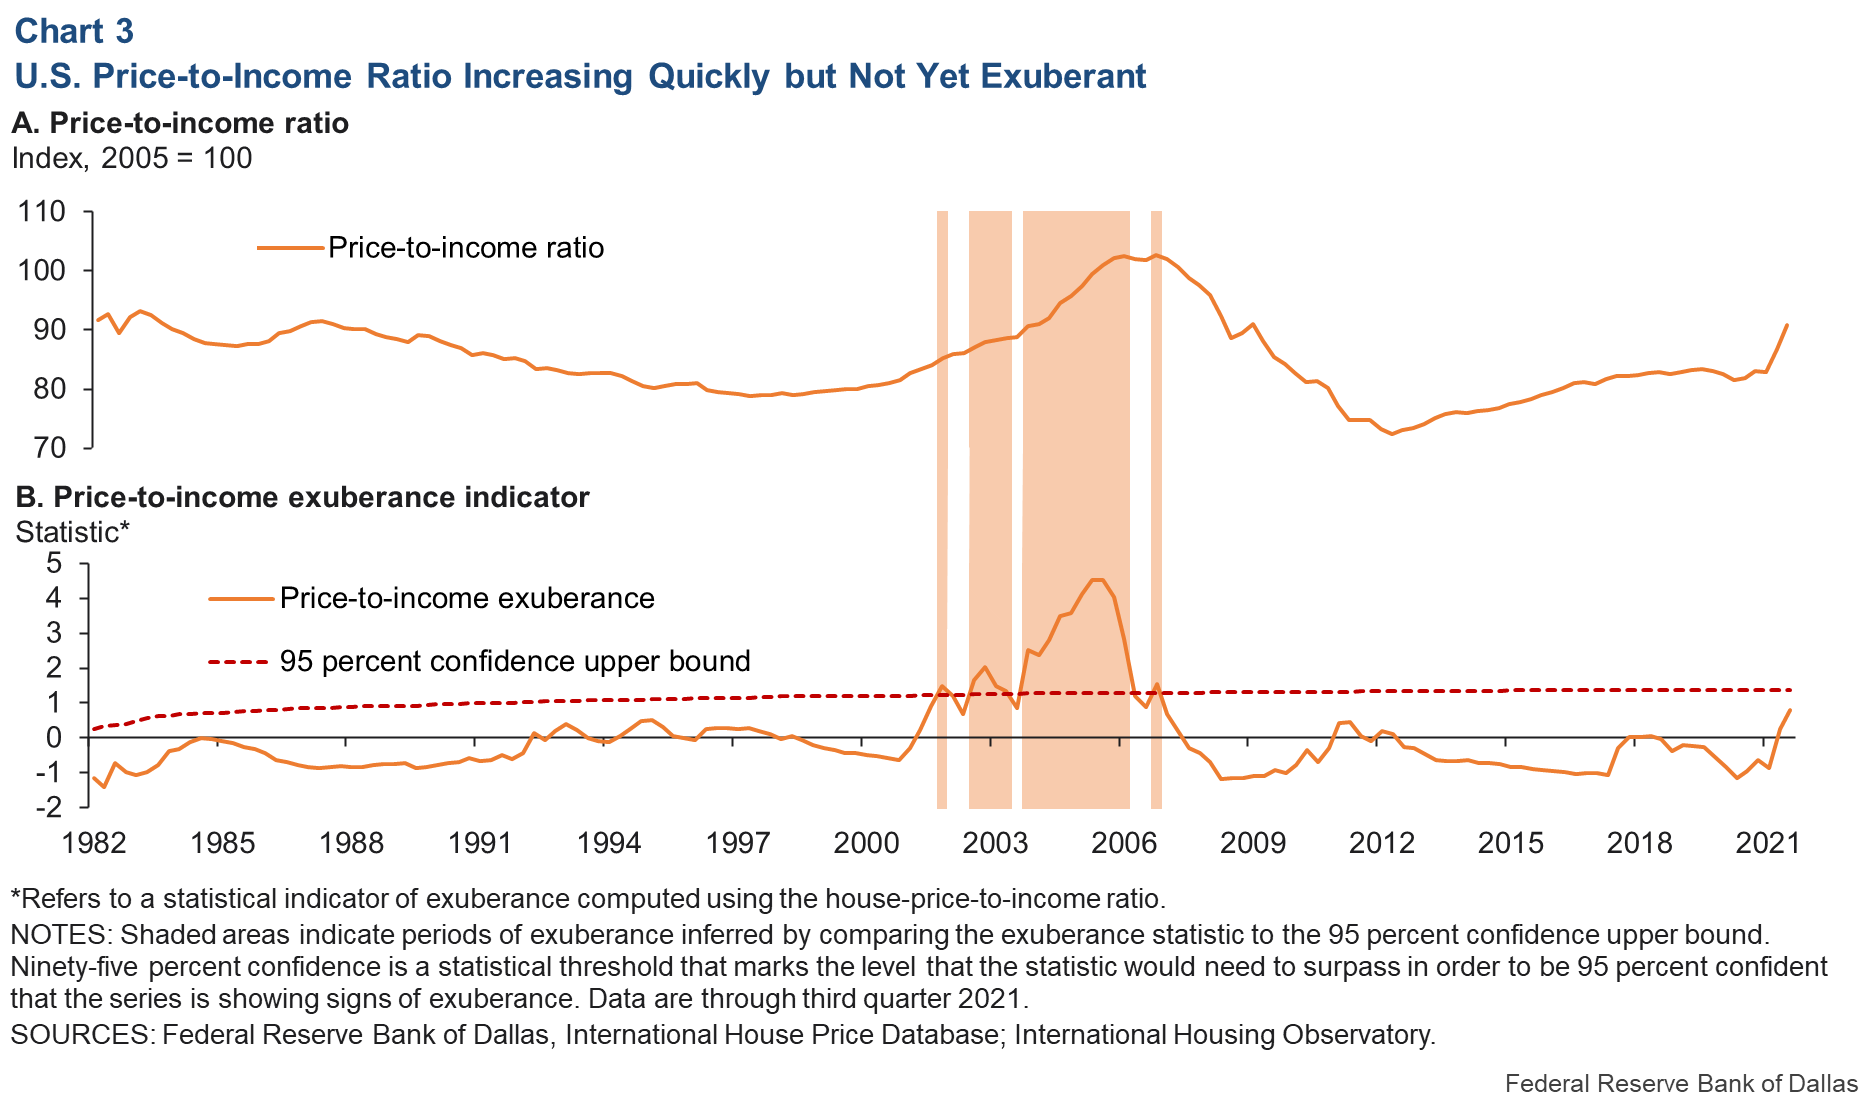 Chart 3: Price-to-Income Ratio Has Been Increasing Quickly, But Not Yet Exuberant